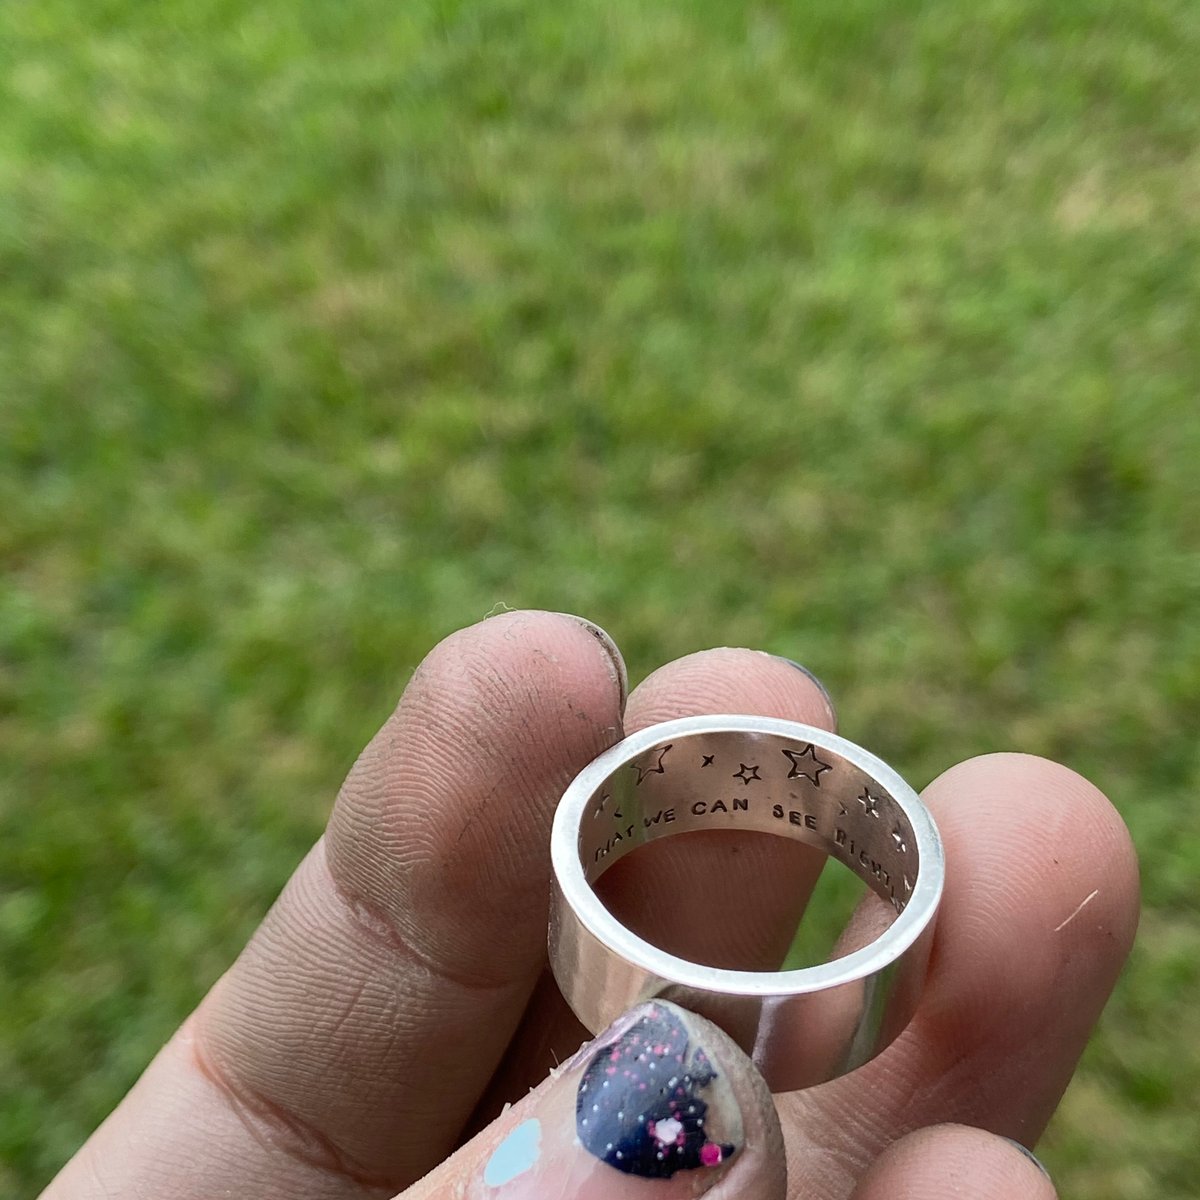 Image of The little prince ring